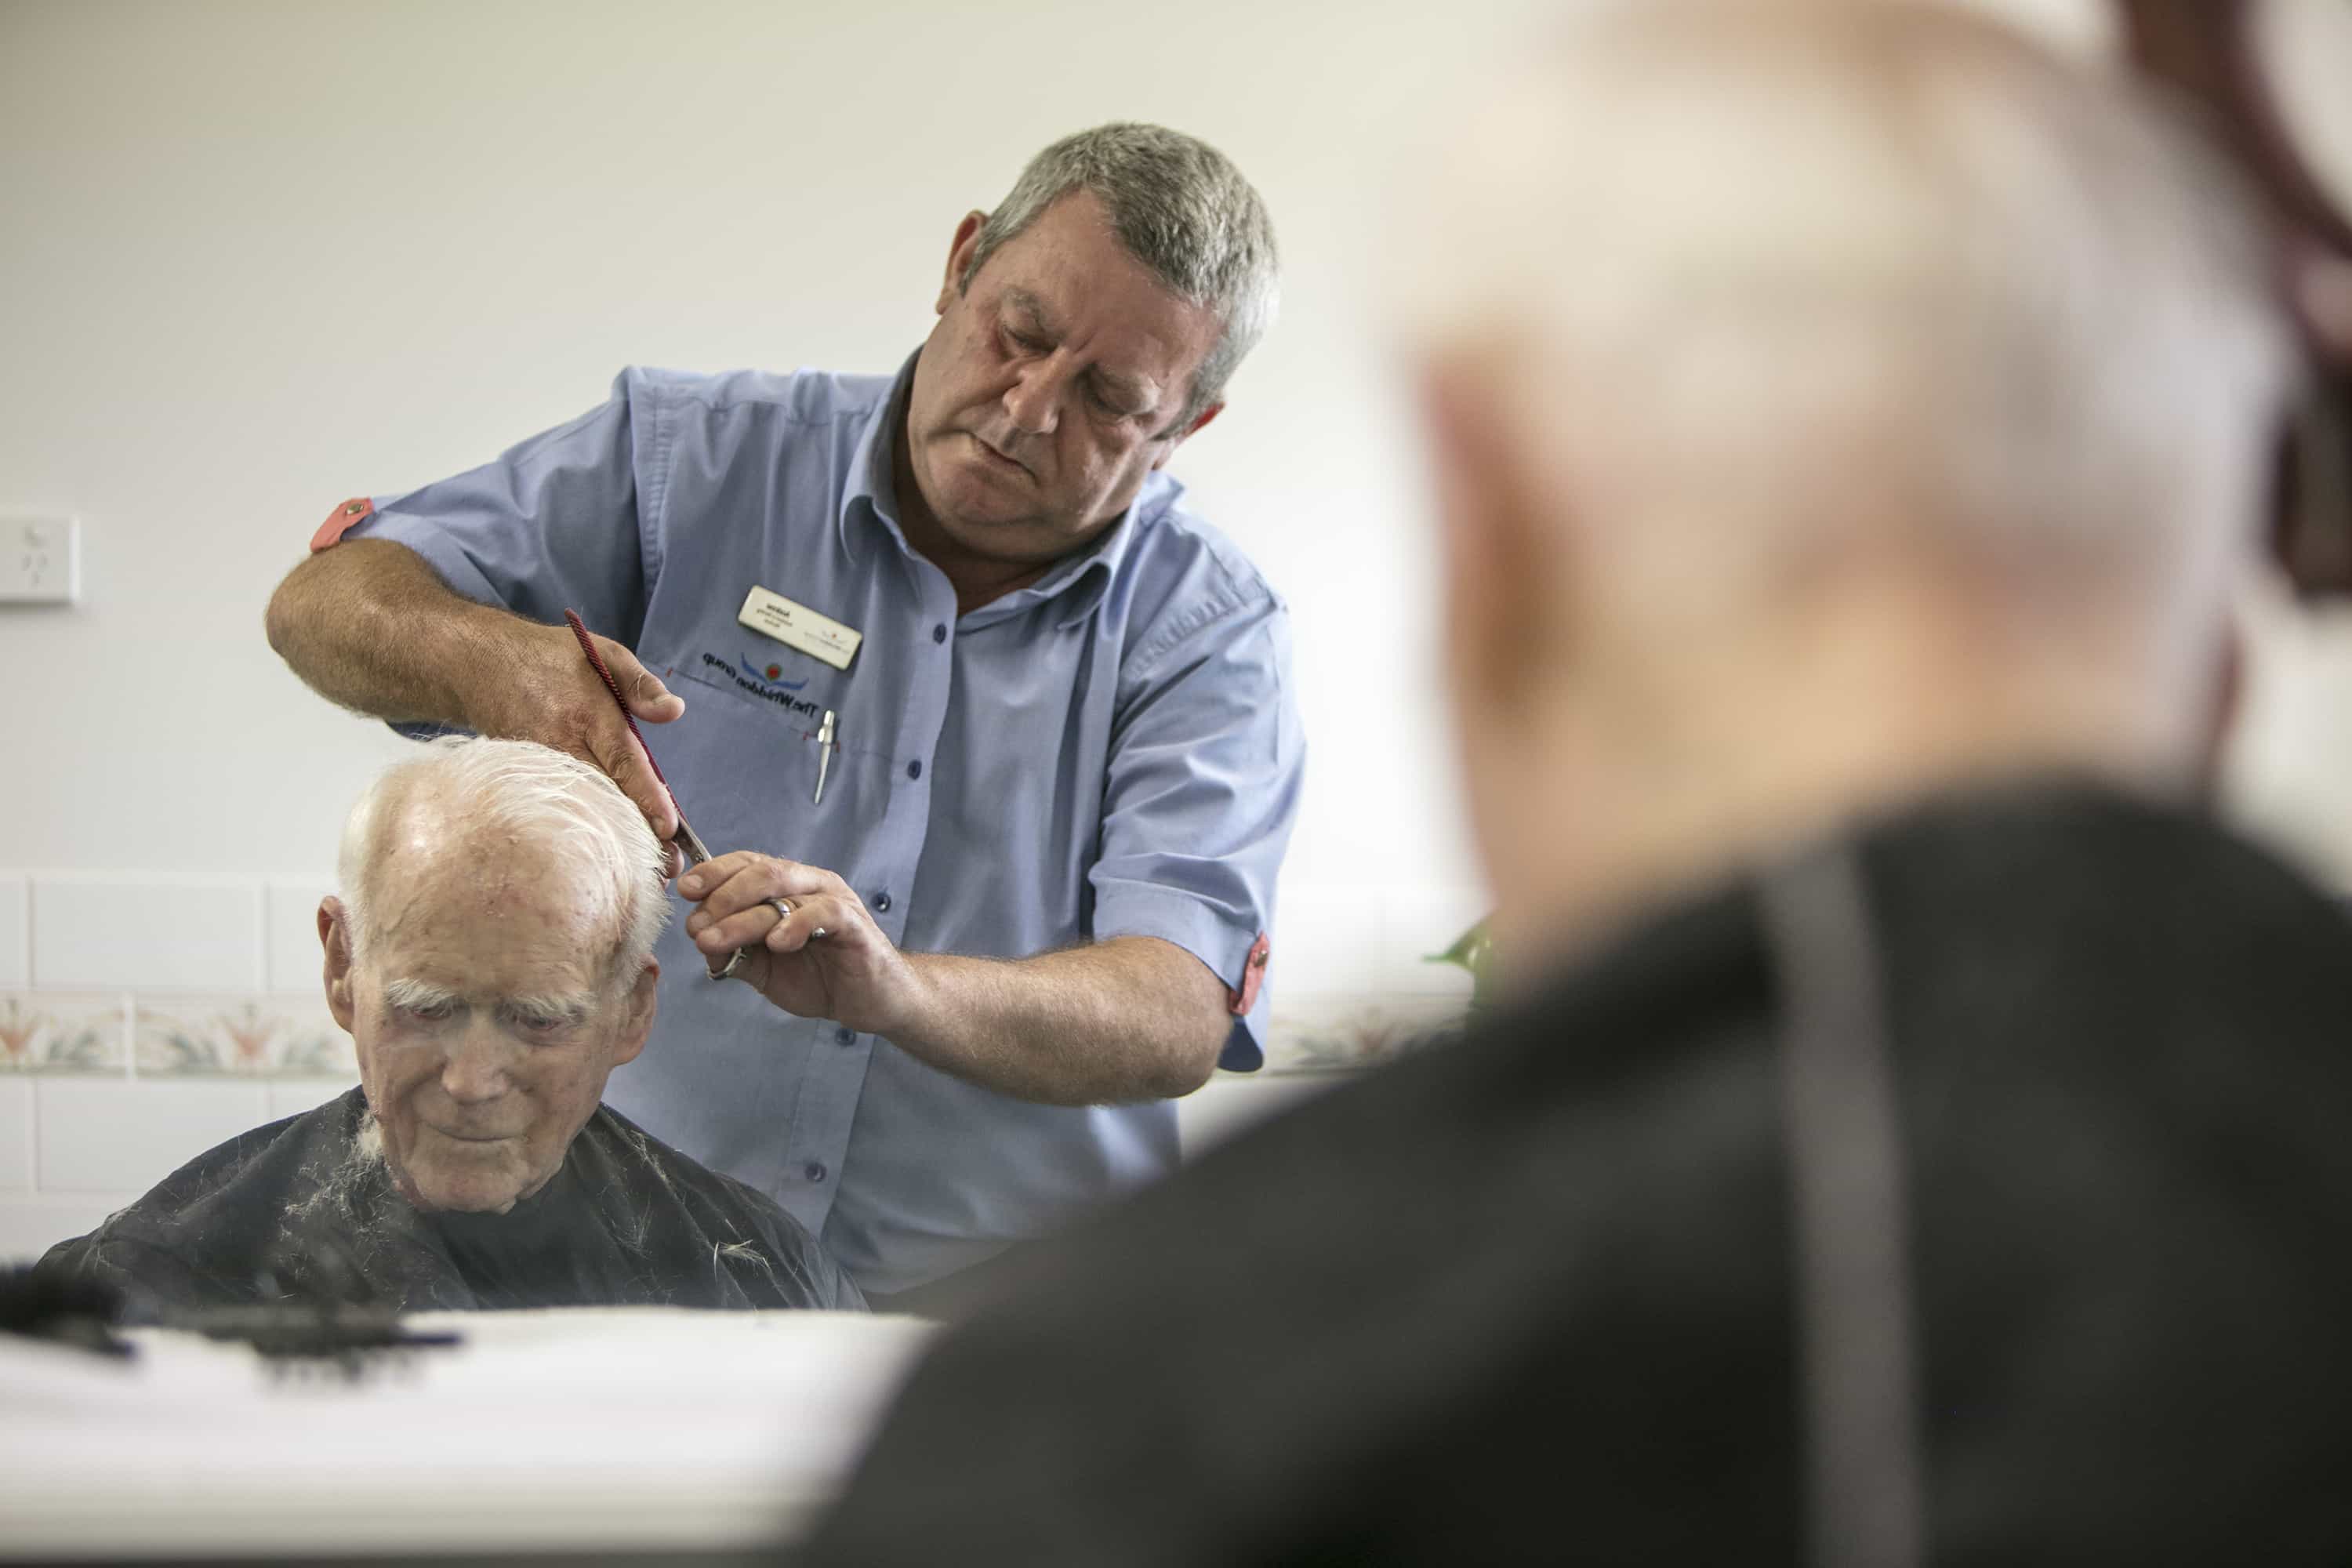 A Whiddon carer giving a resident a haircut at Whiddon Maclean.